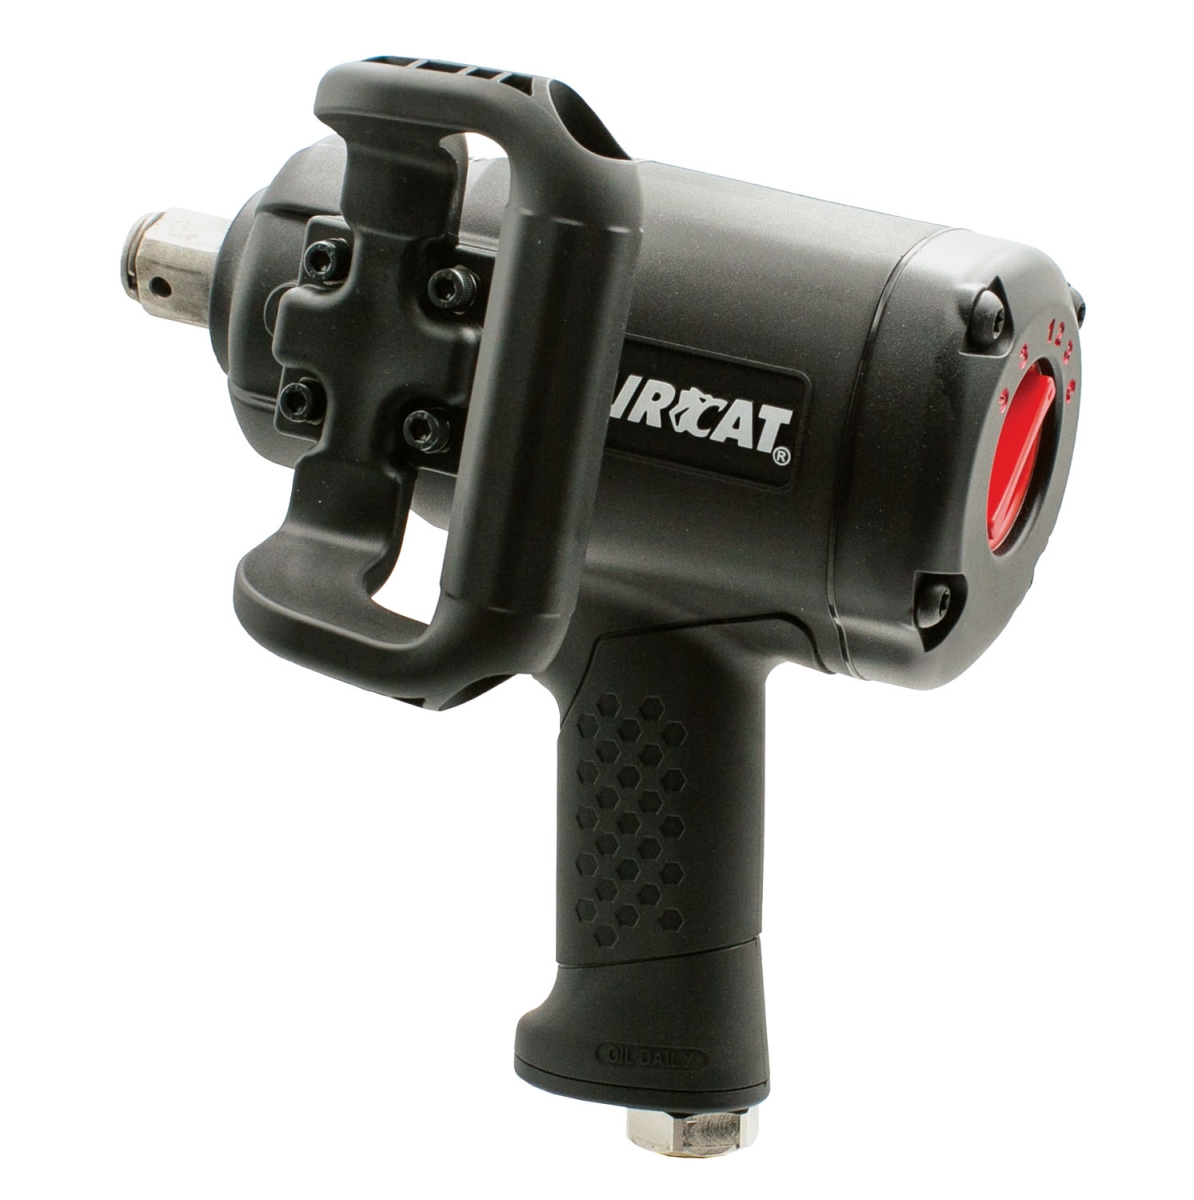 AIRCAT ACA-1870-P 1 in. Low Weight Impact Wrench